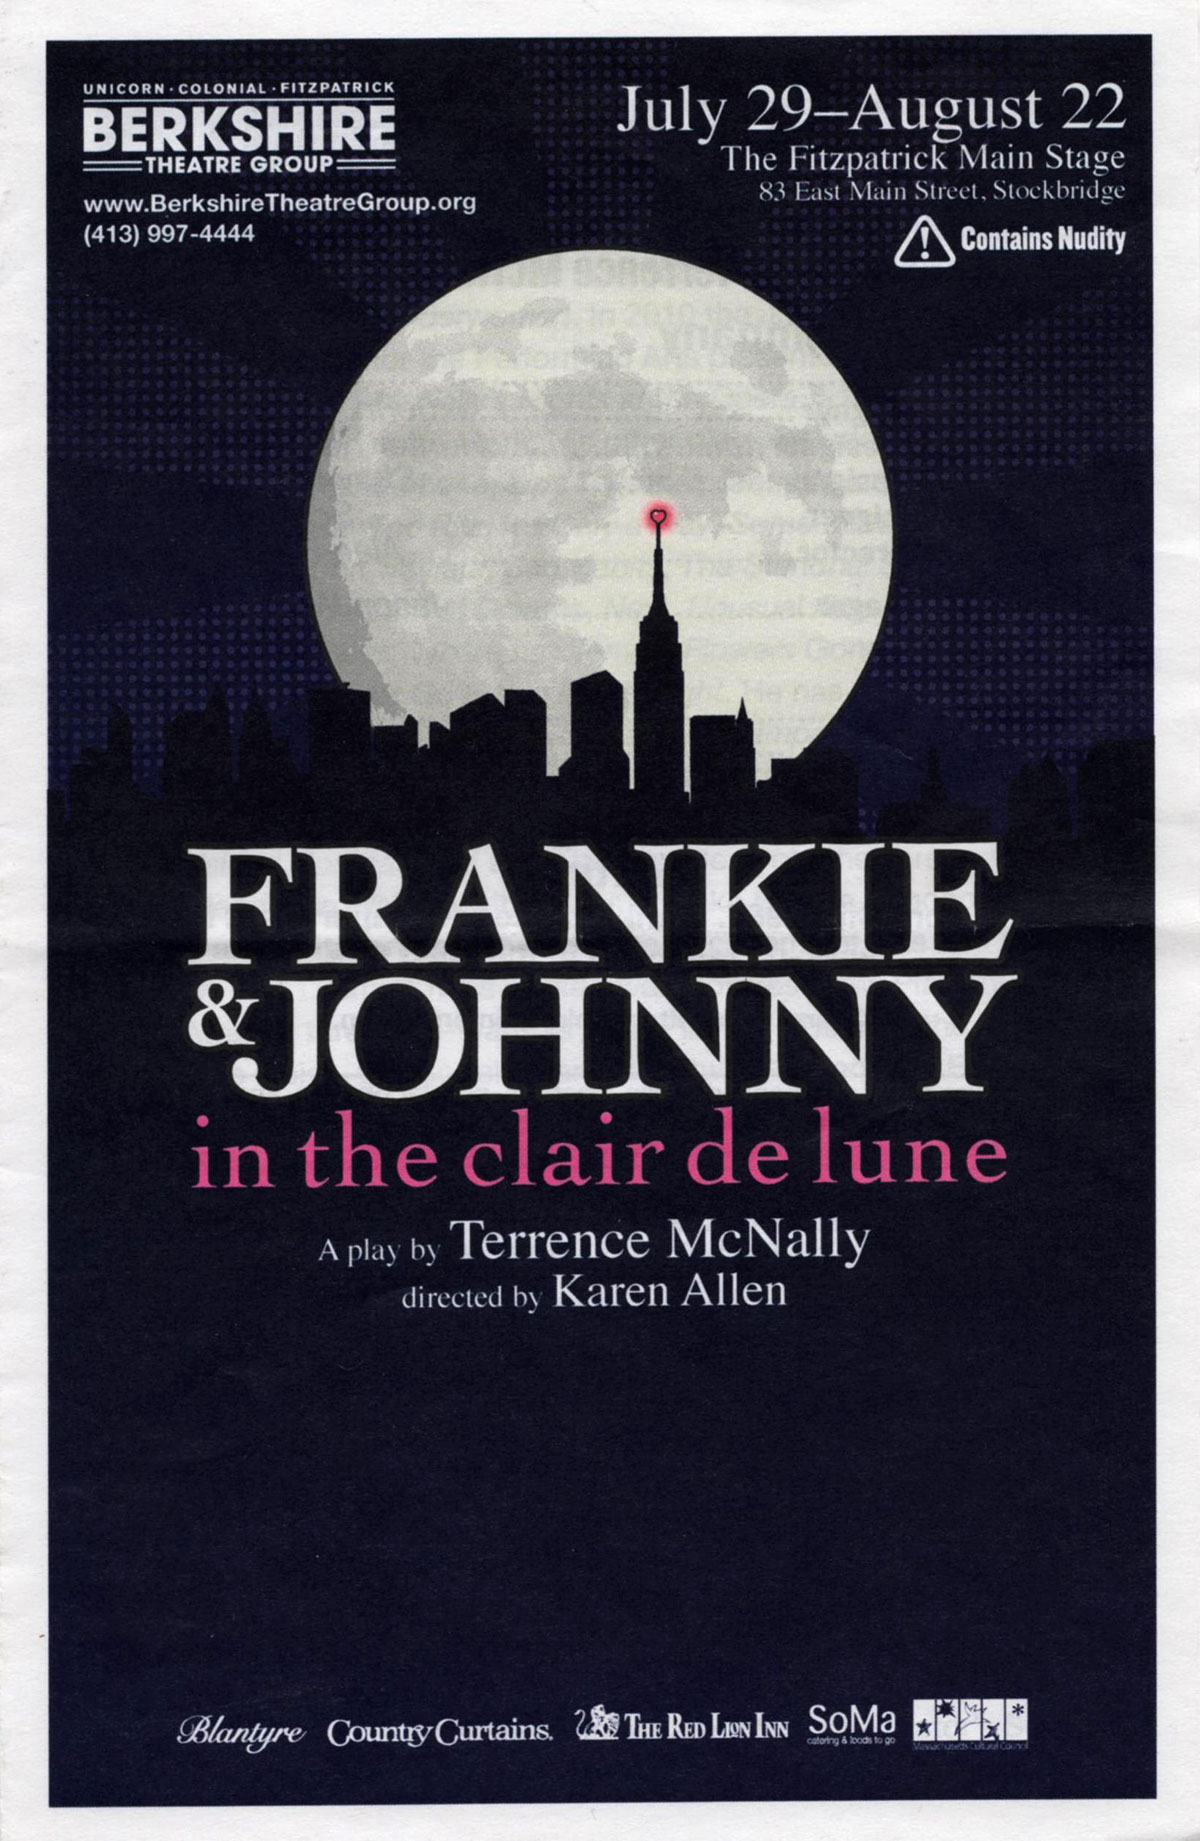 Frankie and Johnny in the Clair de Lune